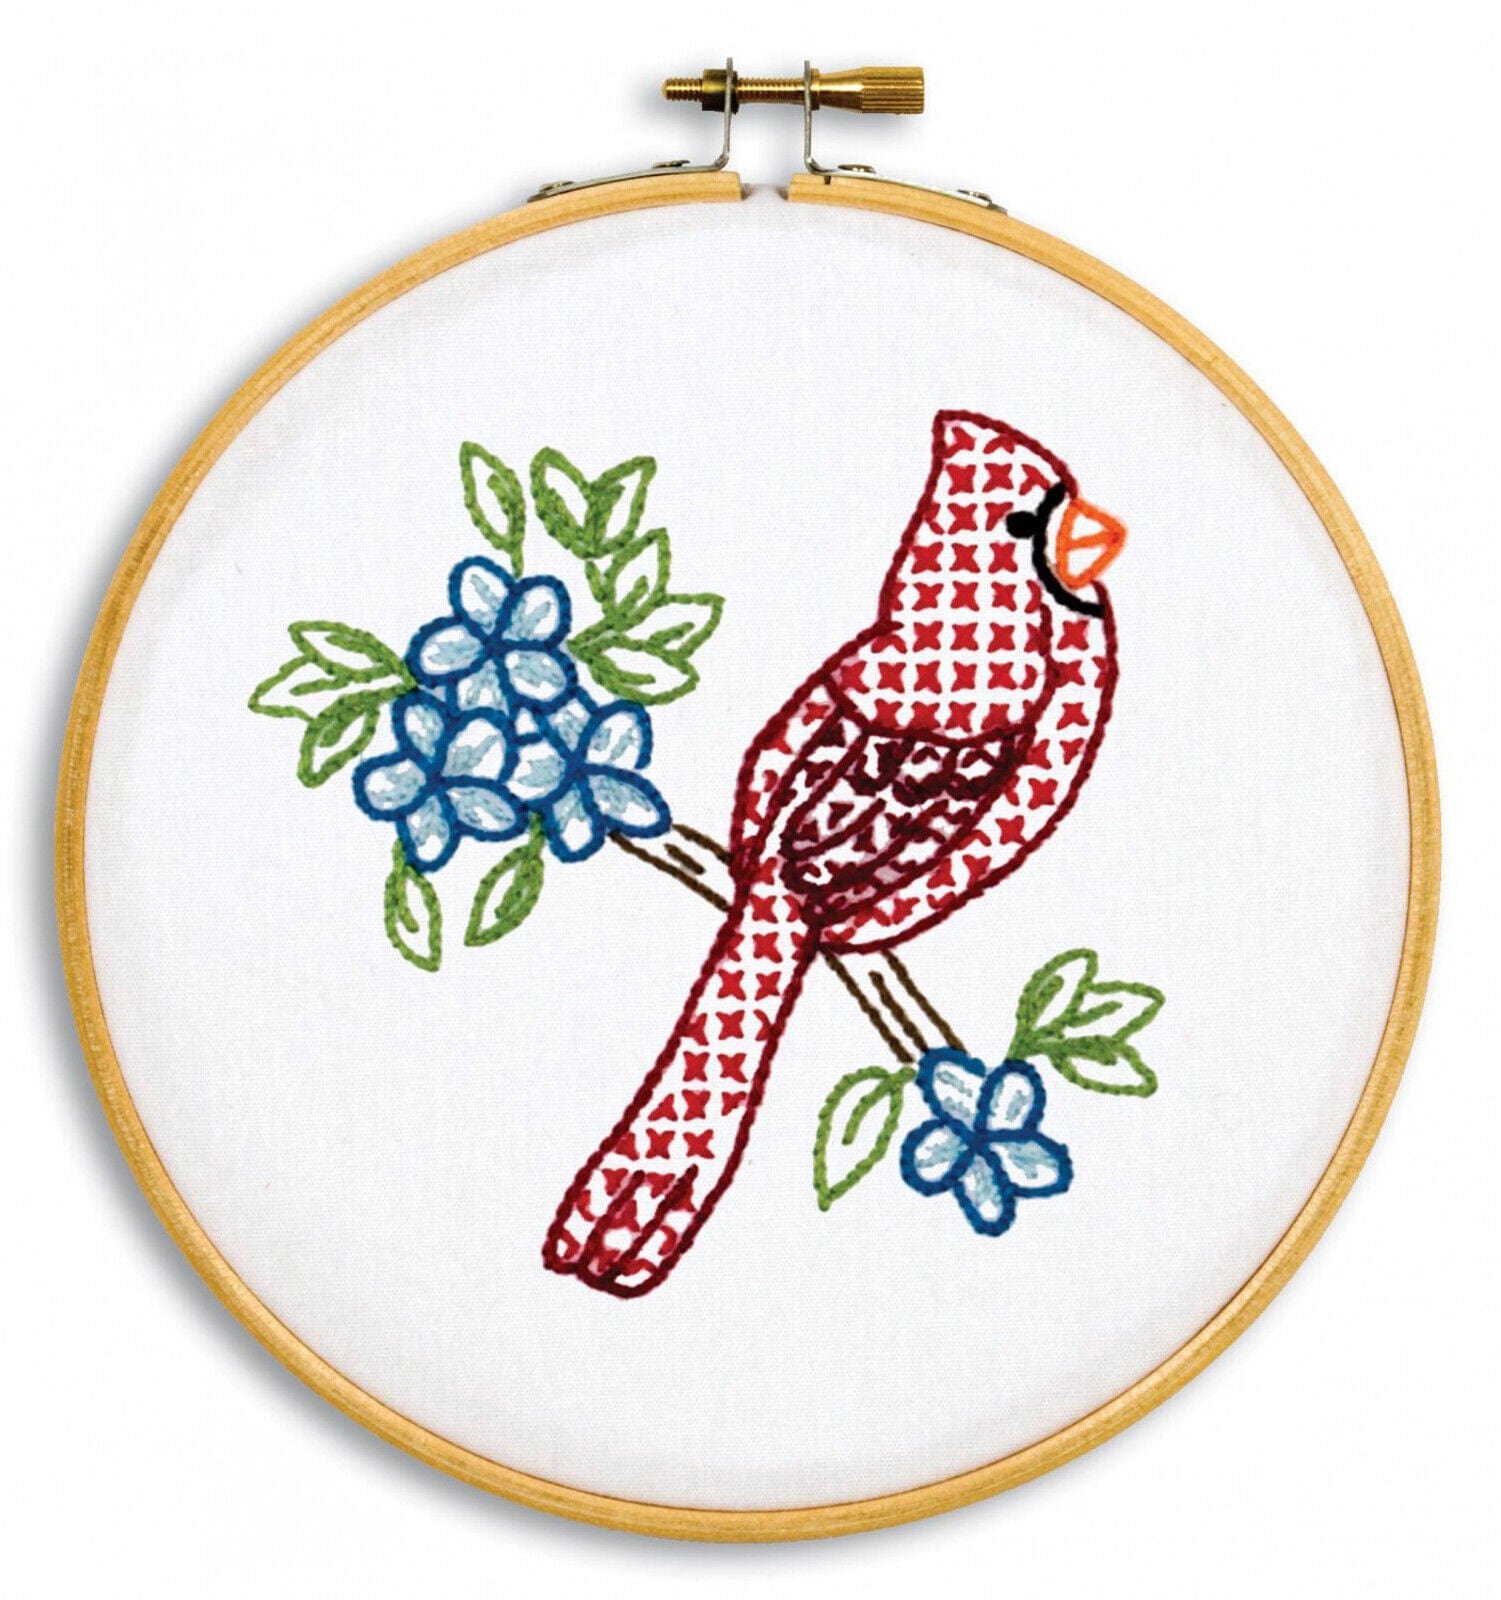 Embroidery - Hand-Stitching